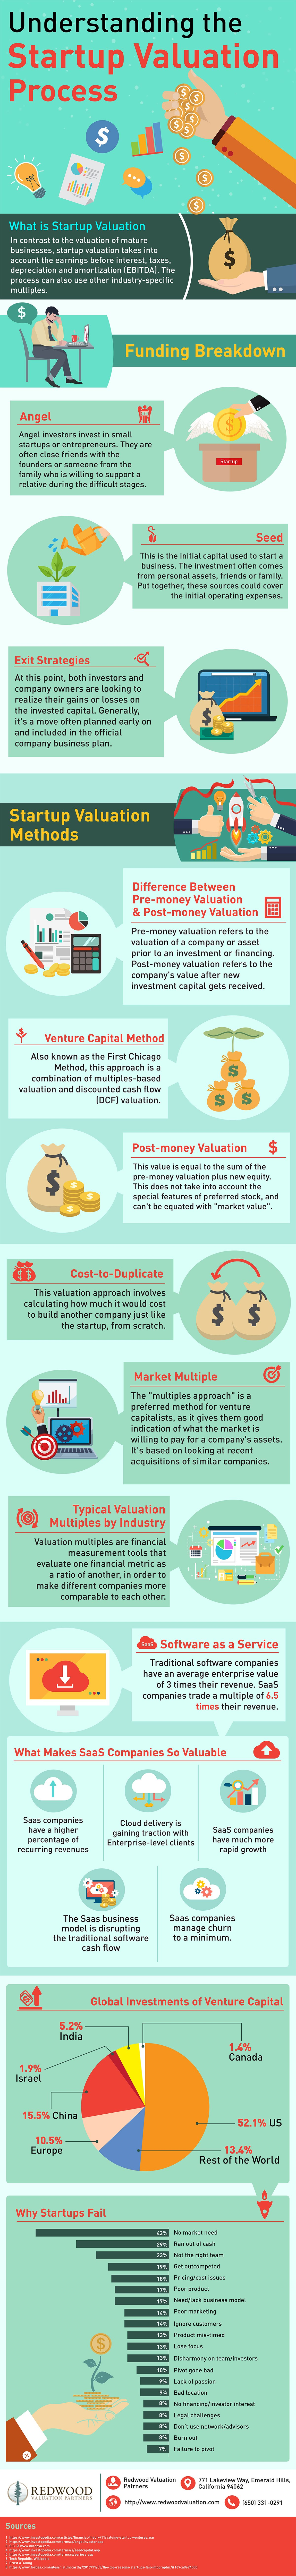 Understanding The Startup Valuation Process #Infographic